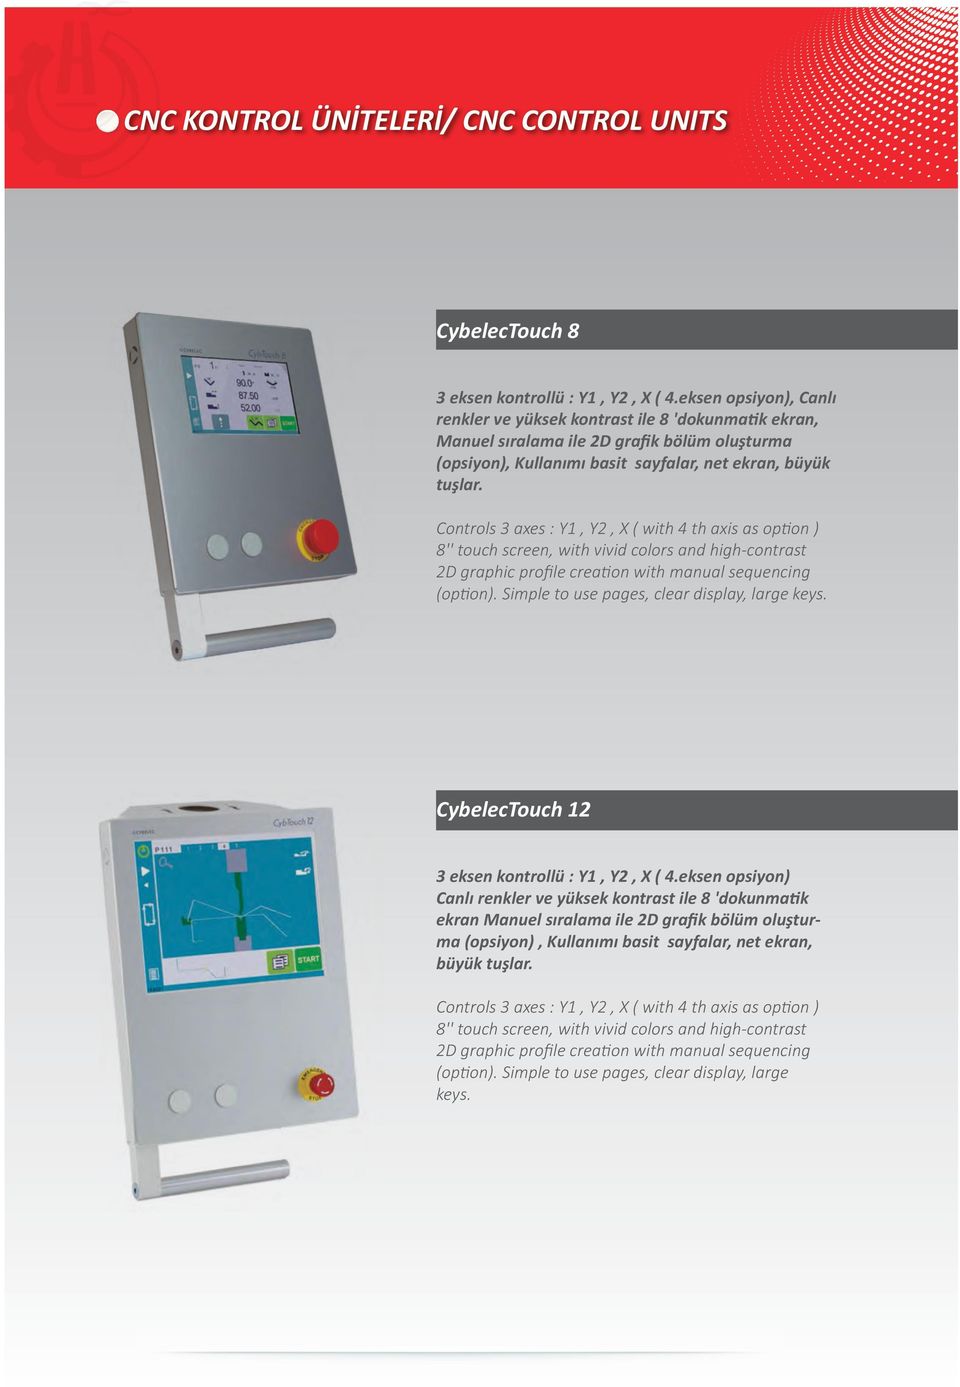 Controls 3 axes : Y1, Y, X ( with 4 th axis as option ) 8'' touch screen, with vivid colors and high-contrast D graphic proﬁle creation with manual sequencing (option).